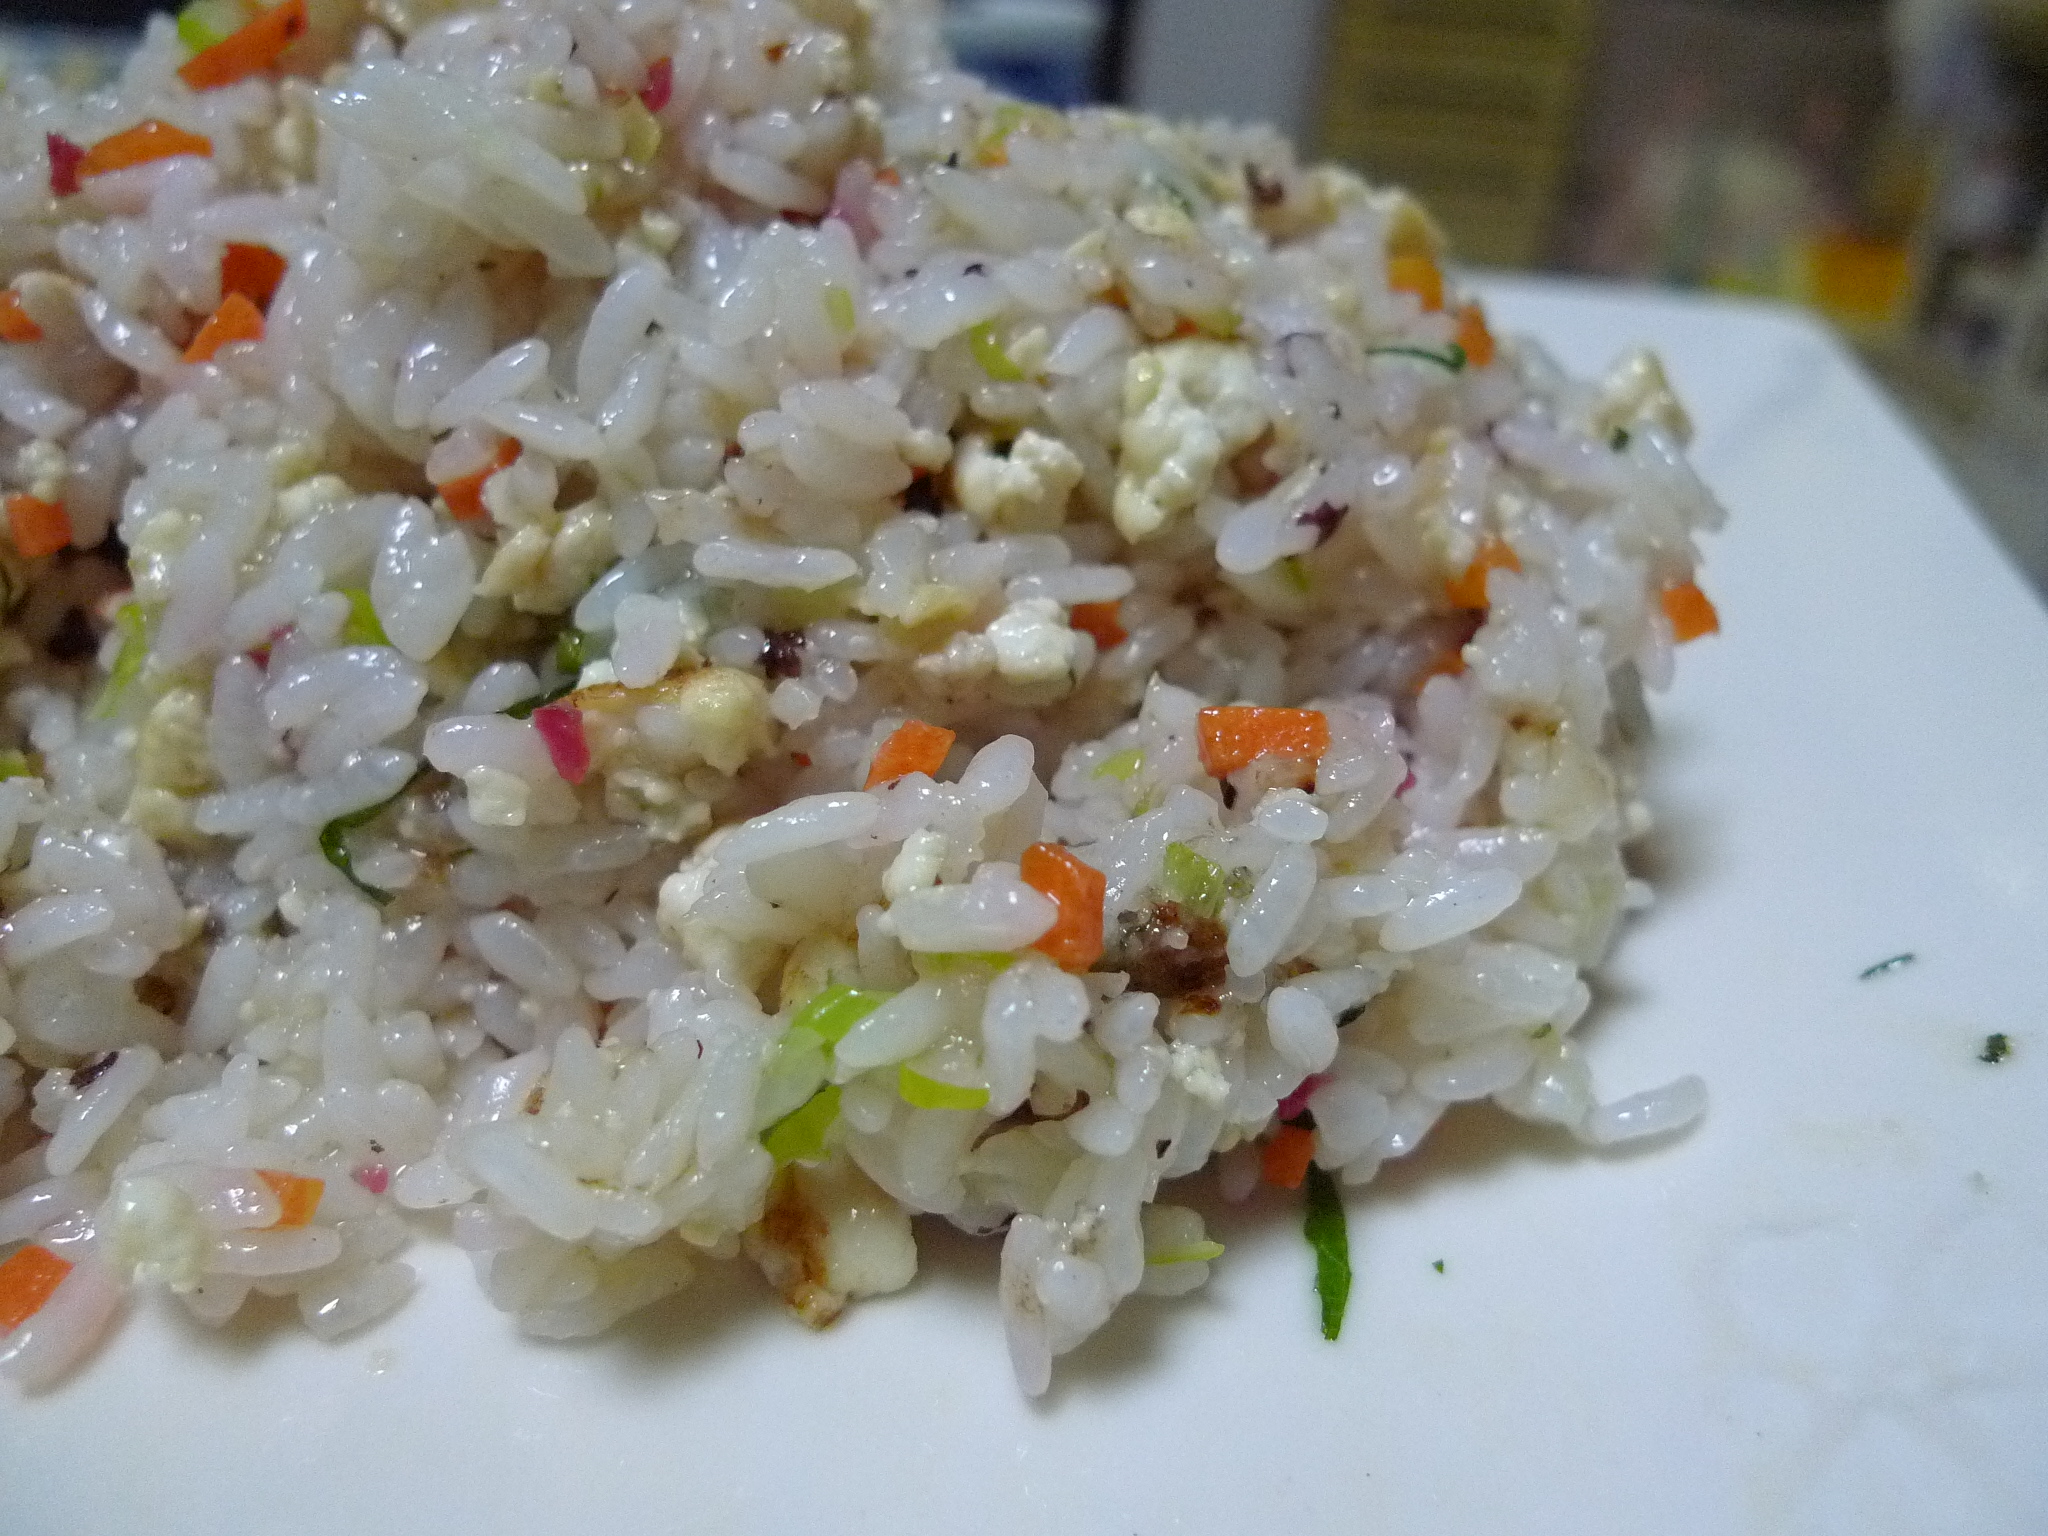 rice with carrots and seasoning is sitting on a white plate